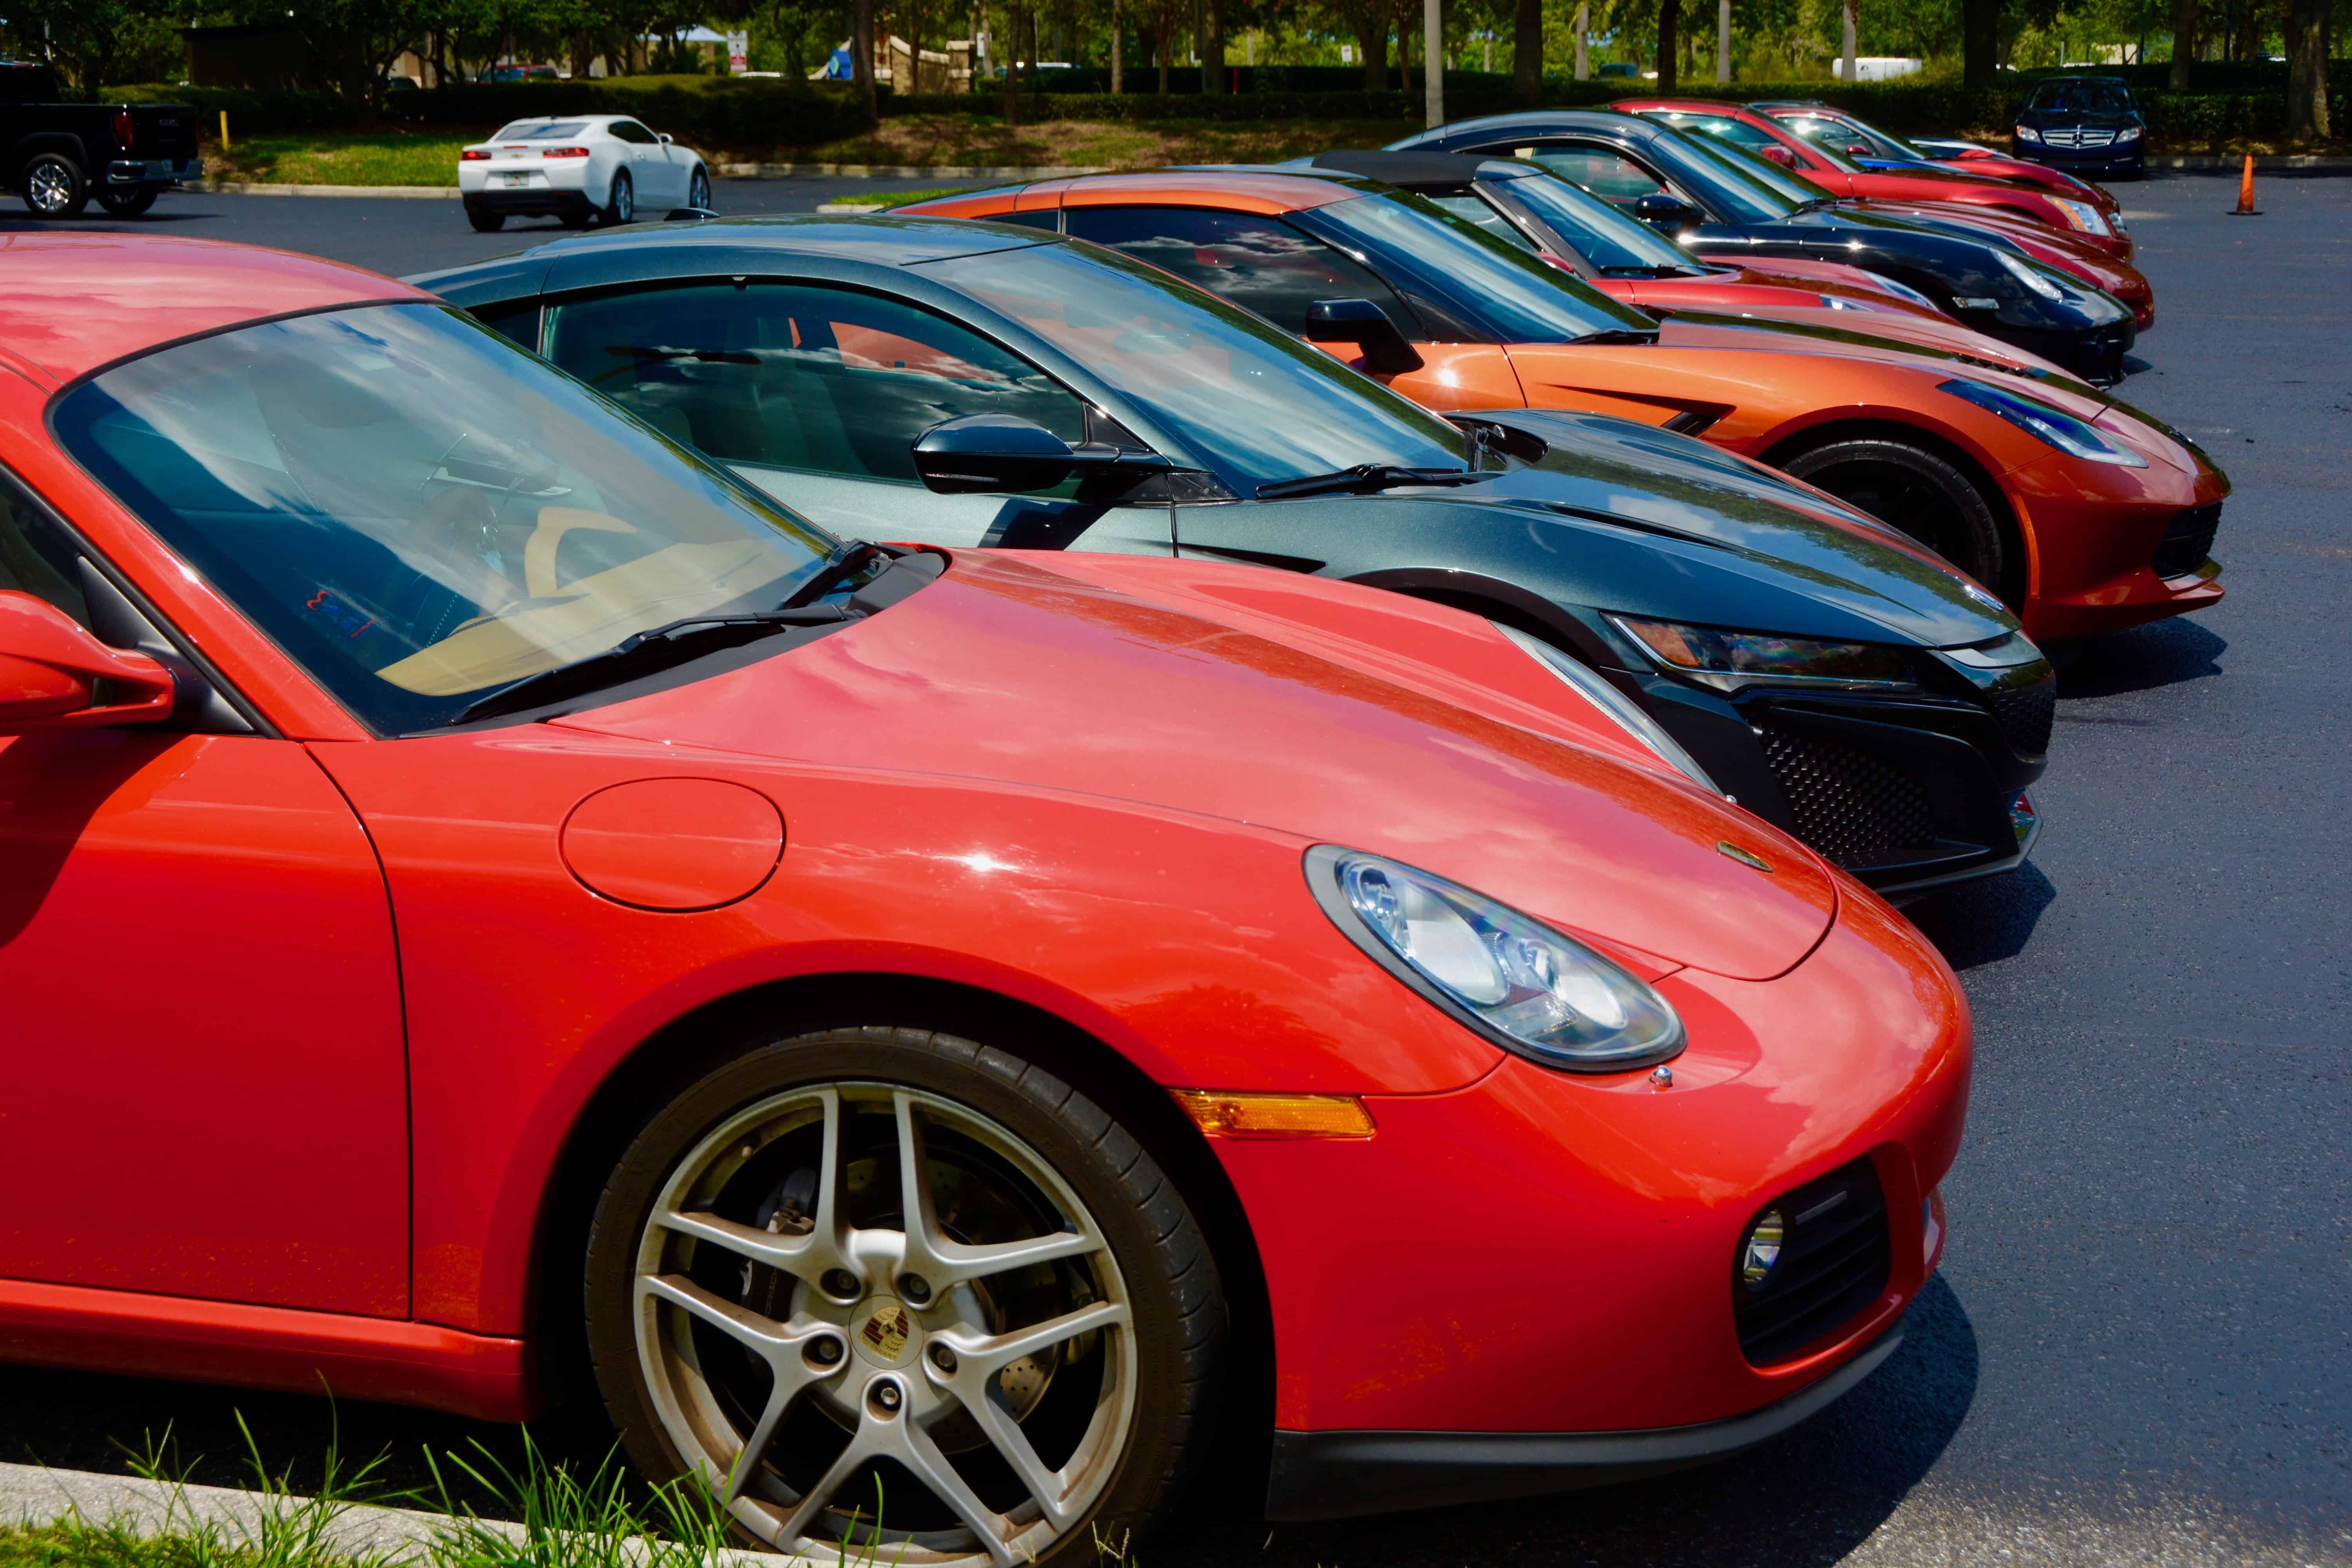 In Sarasota, Florida, it's just lunch, and for car guys only